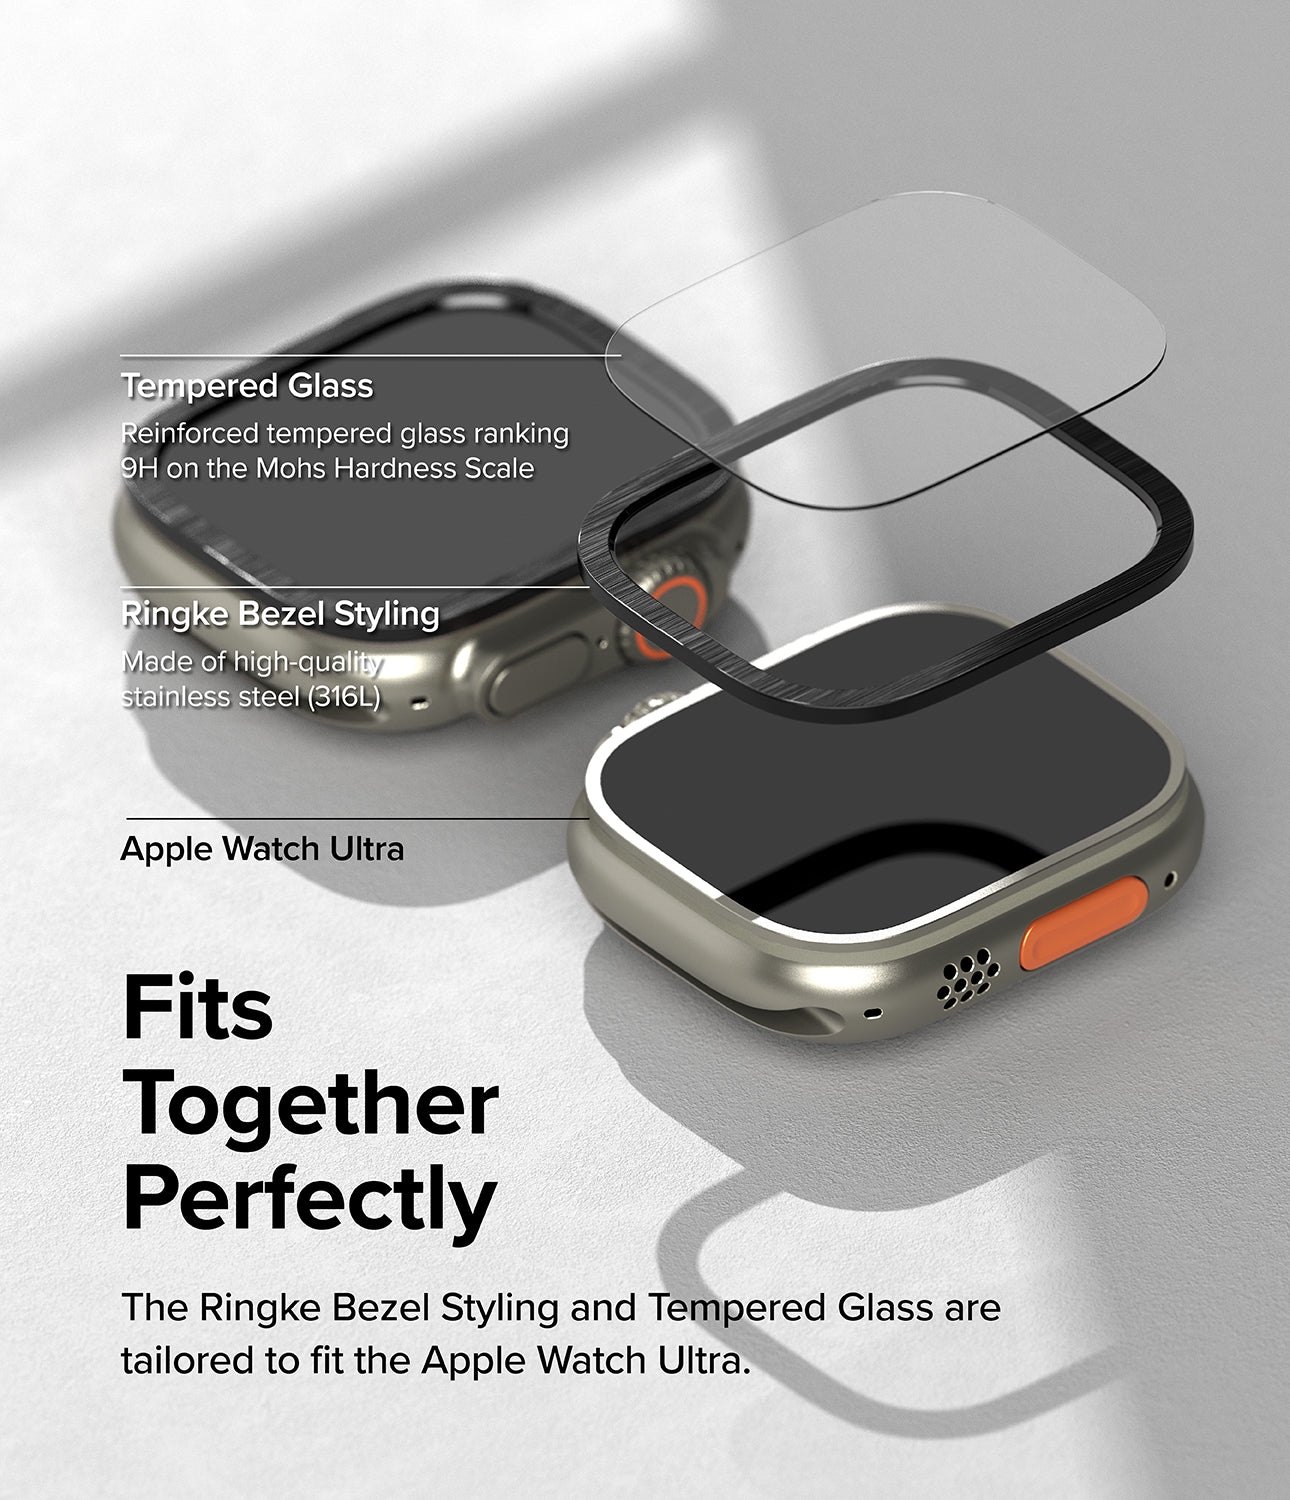 Fits Together Perfectly - The Ringke Bezel Styling and Tempered Glass are tailored to fit the Apple Watch Ultra. Tempered Glass - Reinforced tempered glass ranking 9H on the Mohs Hardness Scale, Ringke Bezel Styling - Made of high-quality stainless steel (316L)